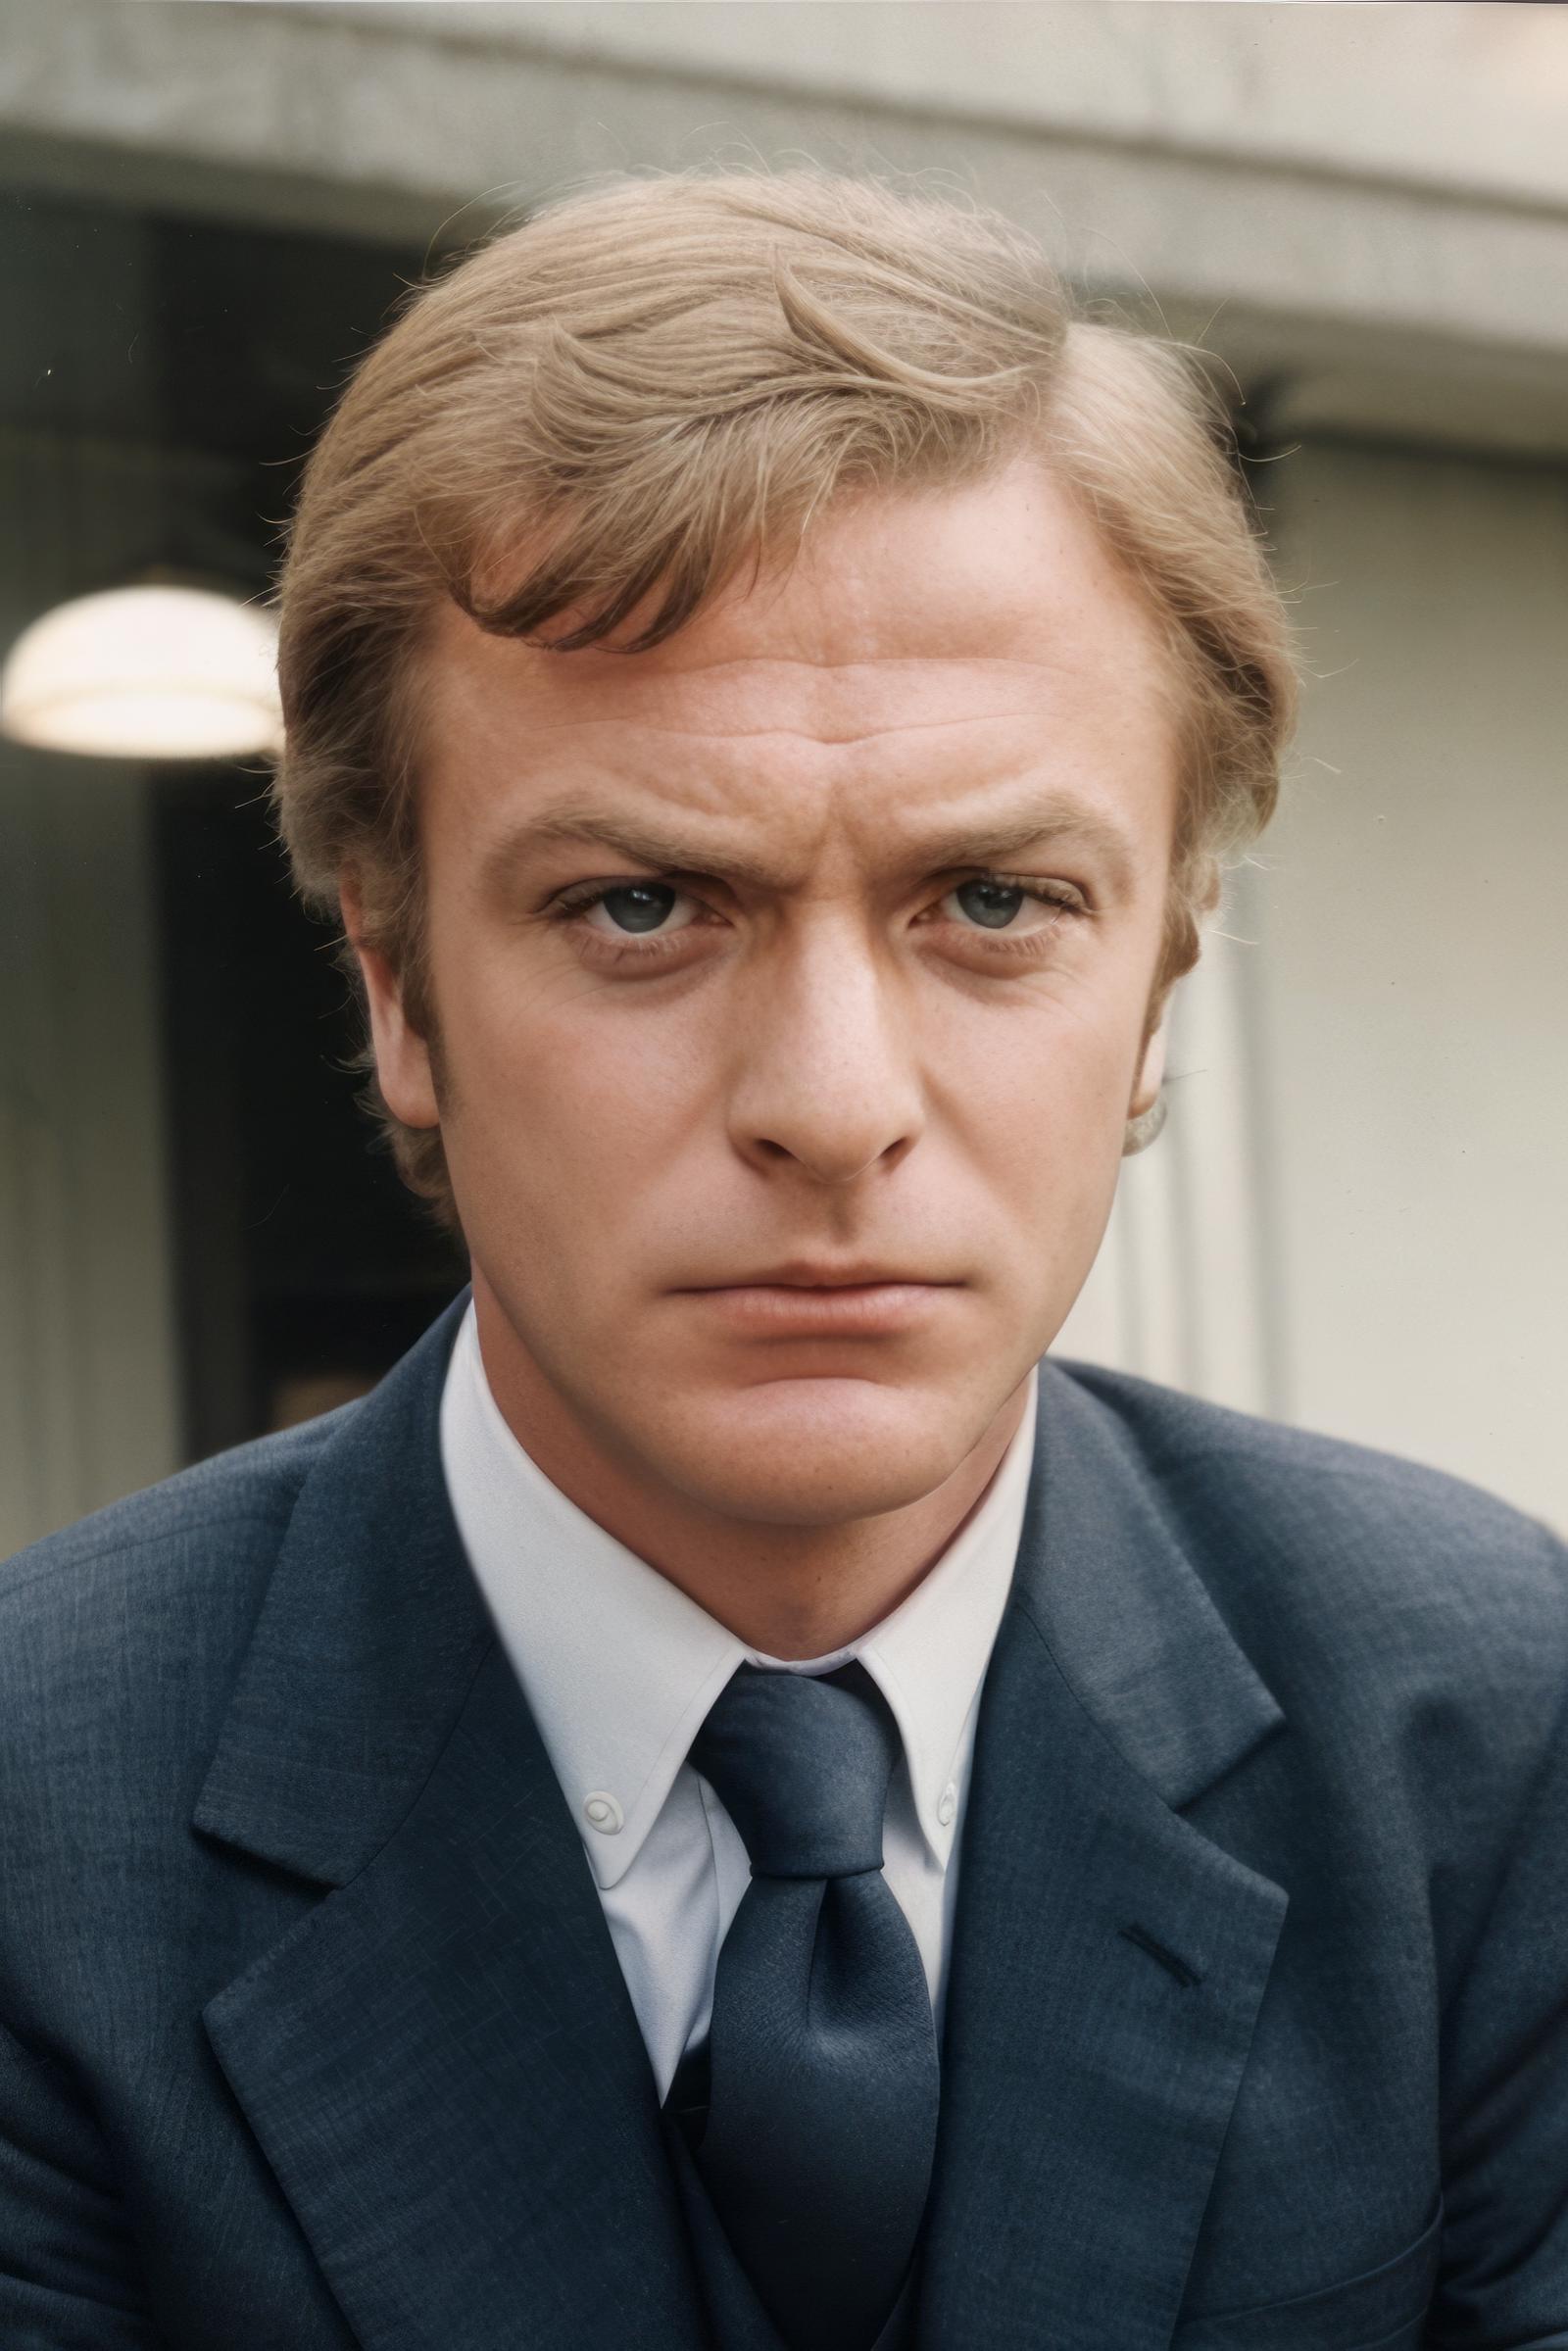 Michael Caine (1960s/1970s) image by Cyberdelia